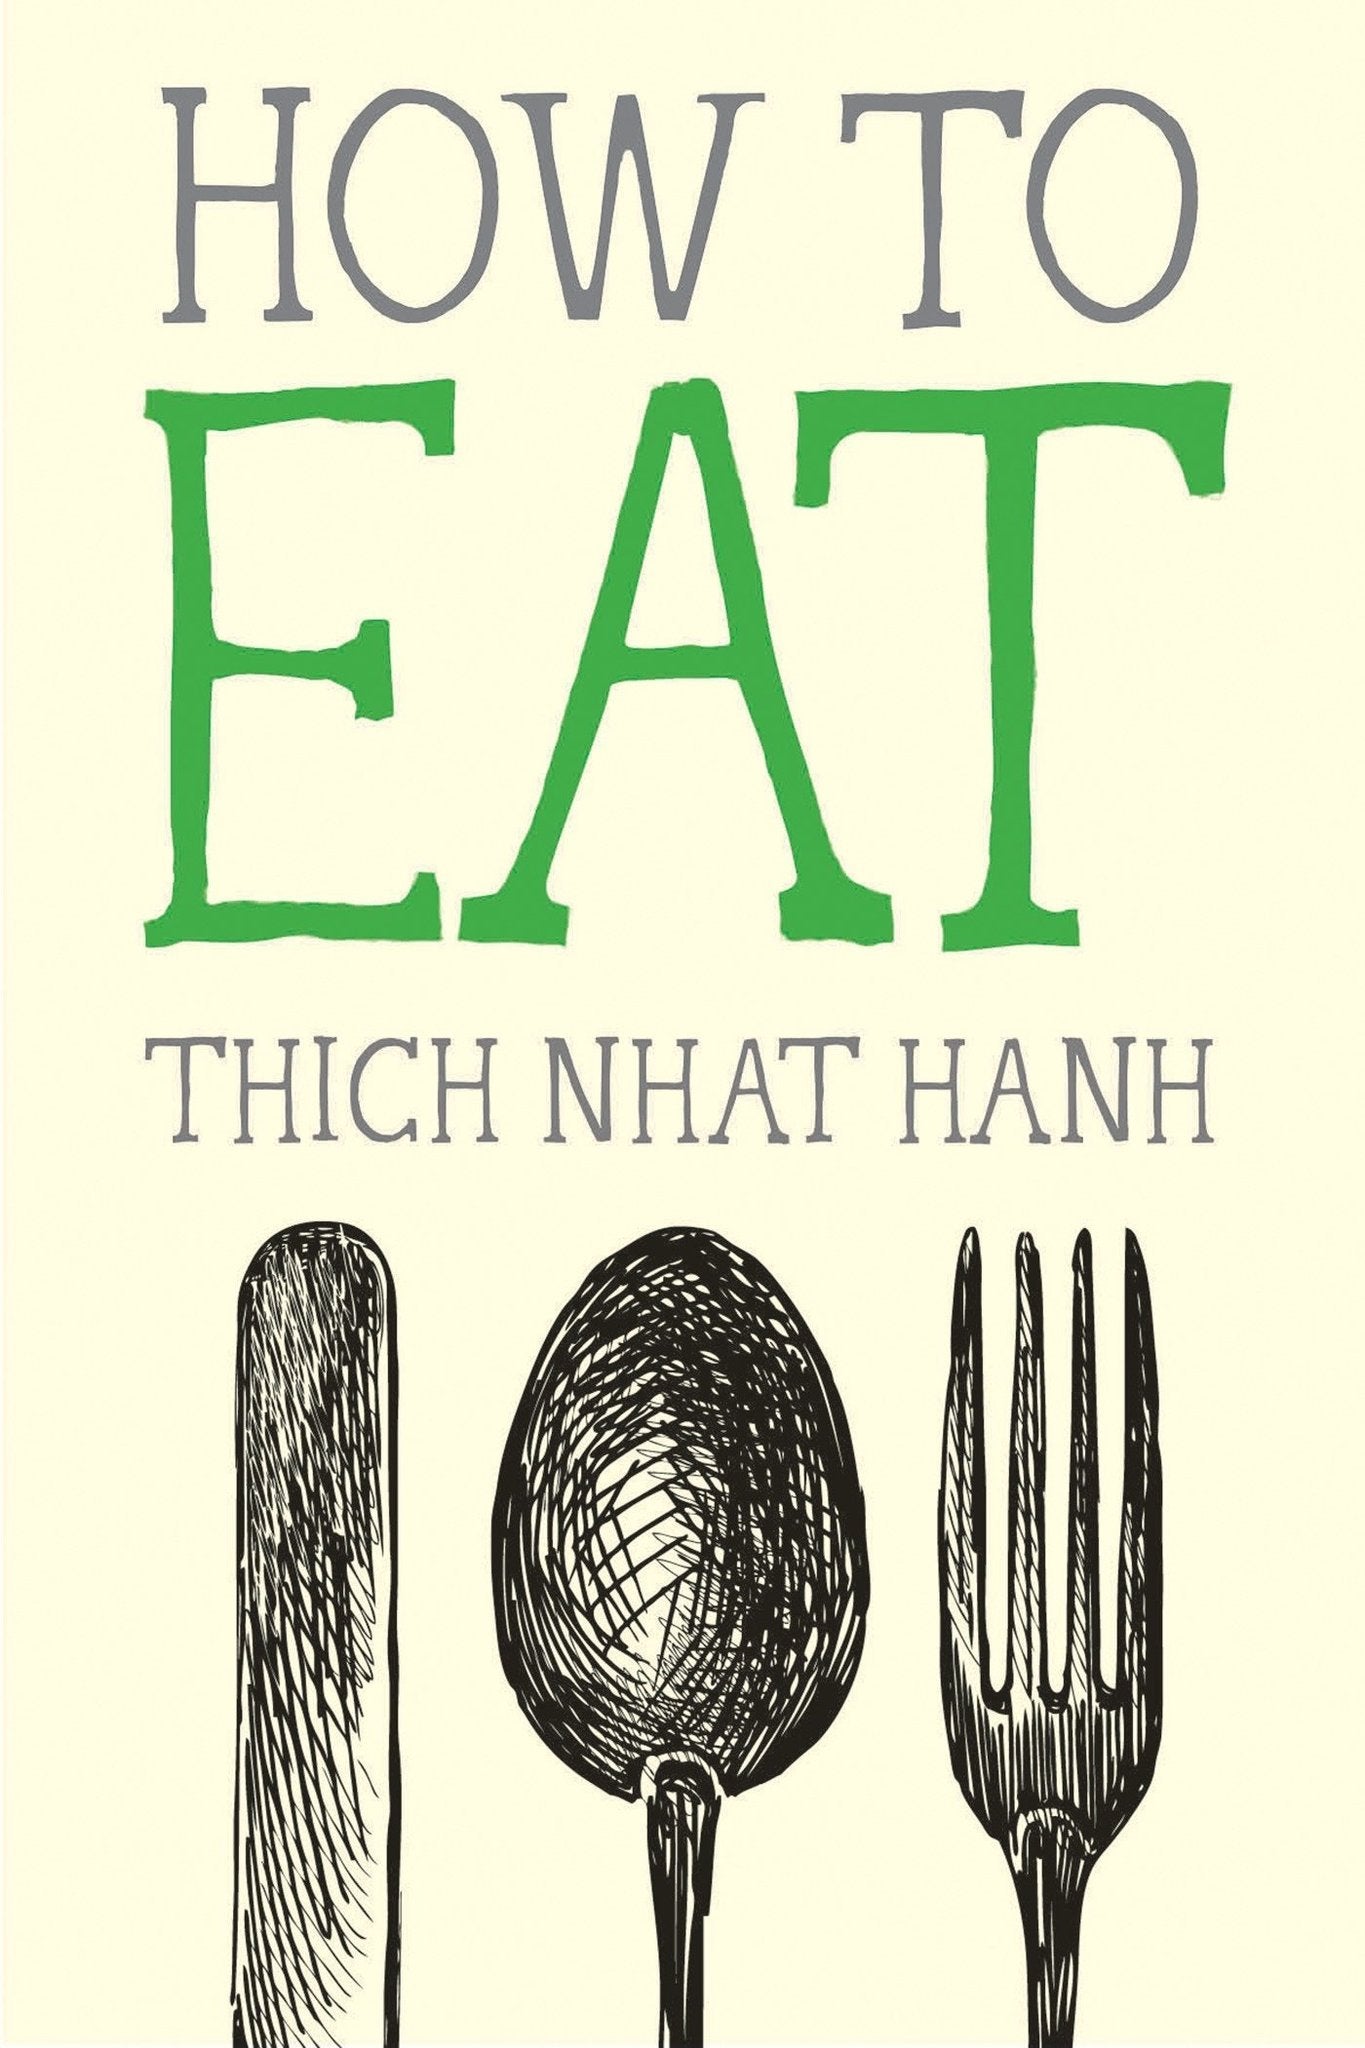 Cover of How to Eat by Thich Nhat Hanh.